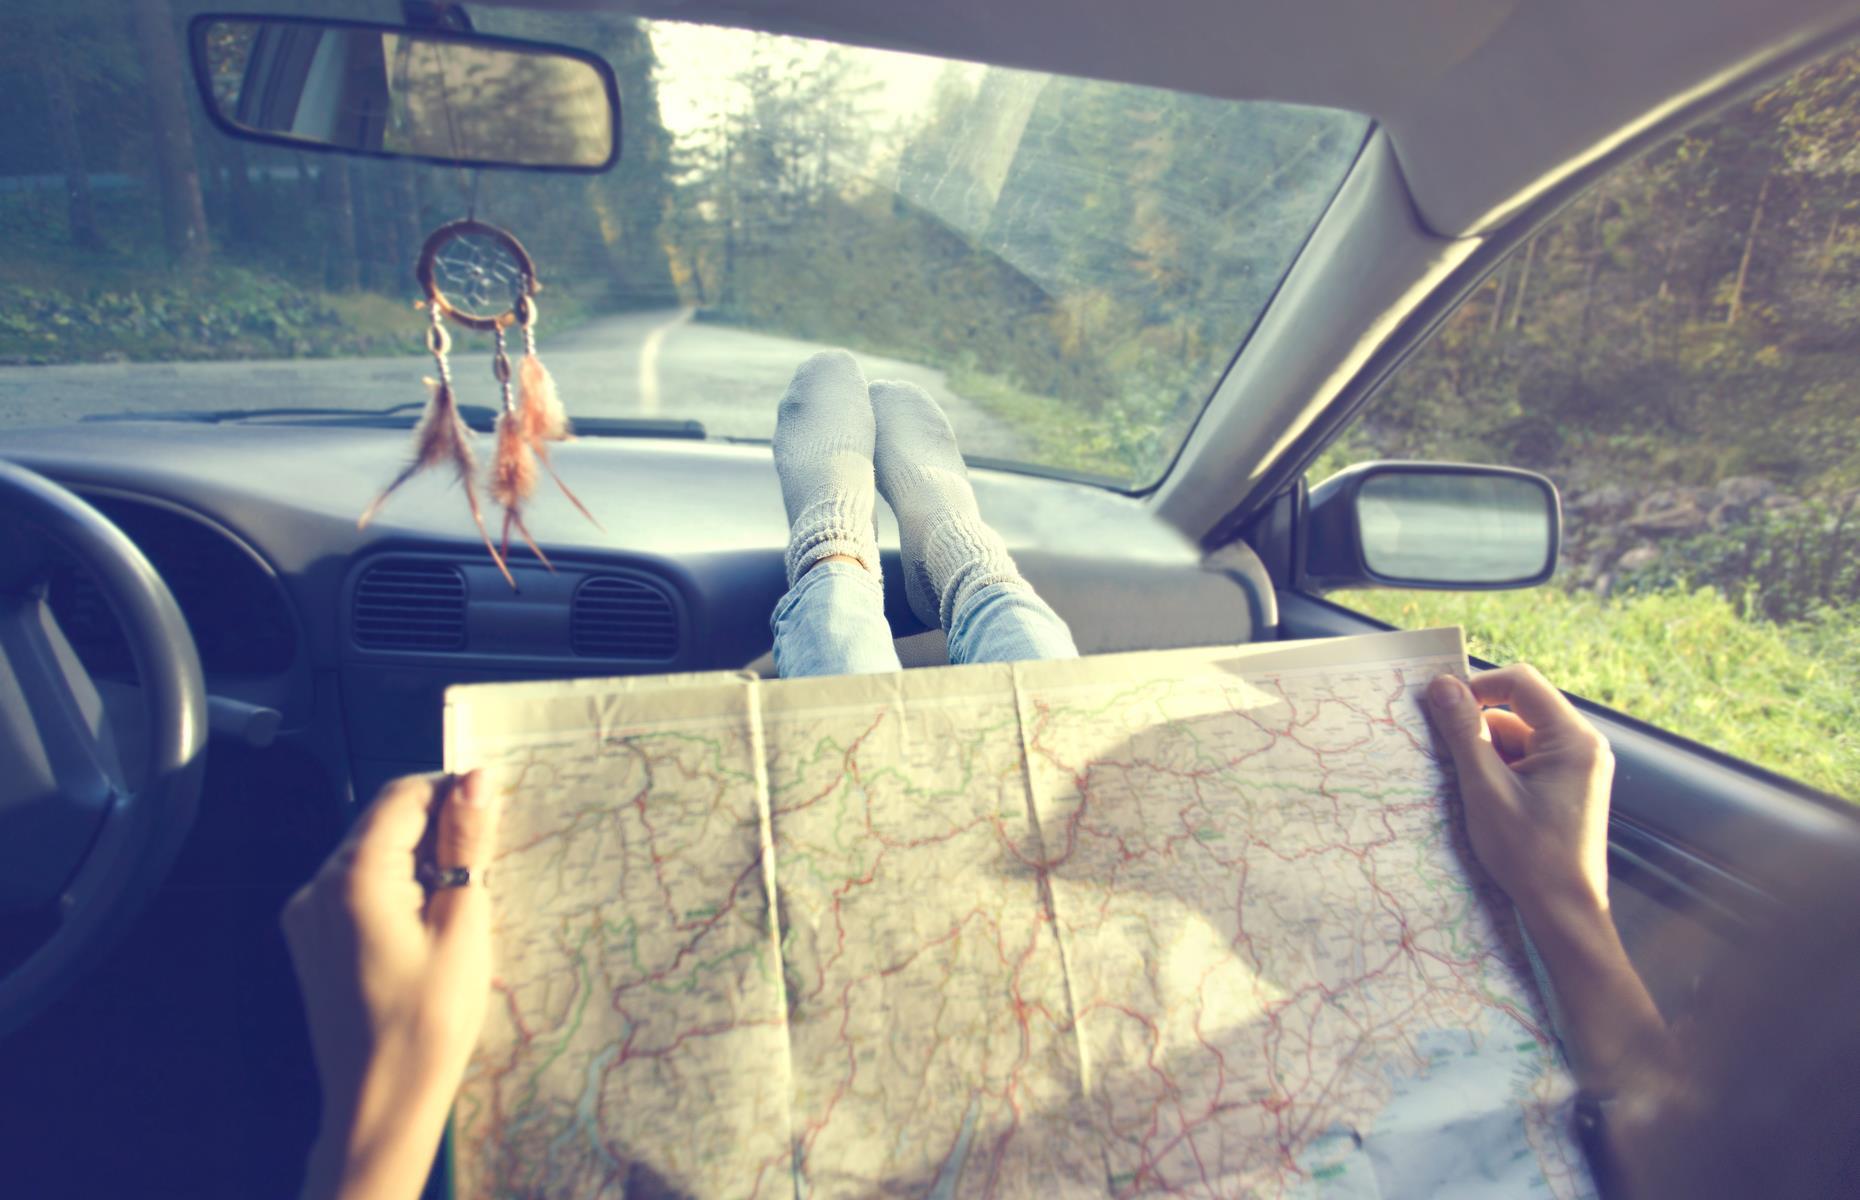 Road trips are all about adventure and possibility, and the sense of freedom and flexibility they come with is a huge part of the appeal. But it never hurts to be prepared, particularly as car and RV vacations continue to skyrocket in popularity. Here’s our guide to a stress-free trip.